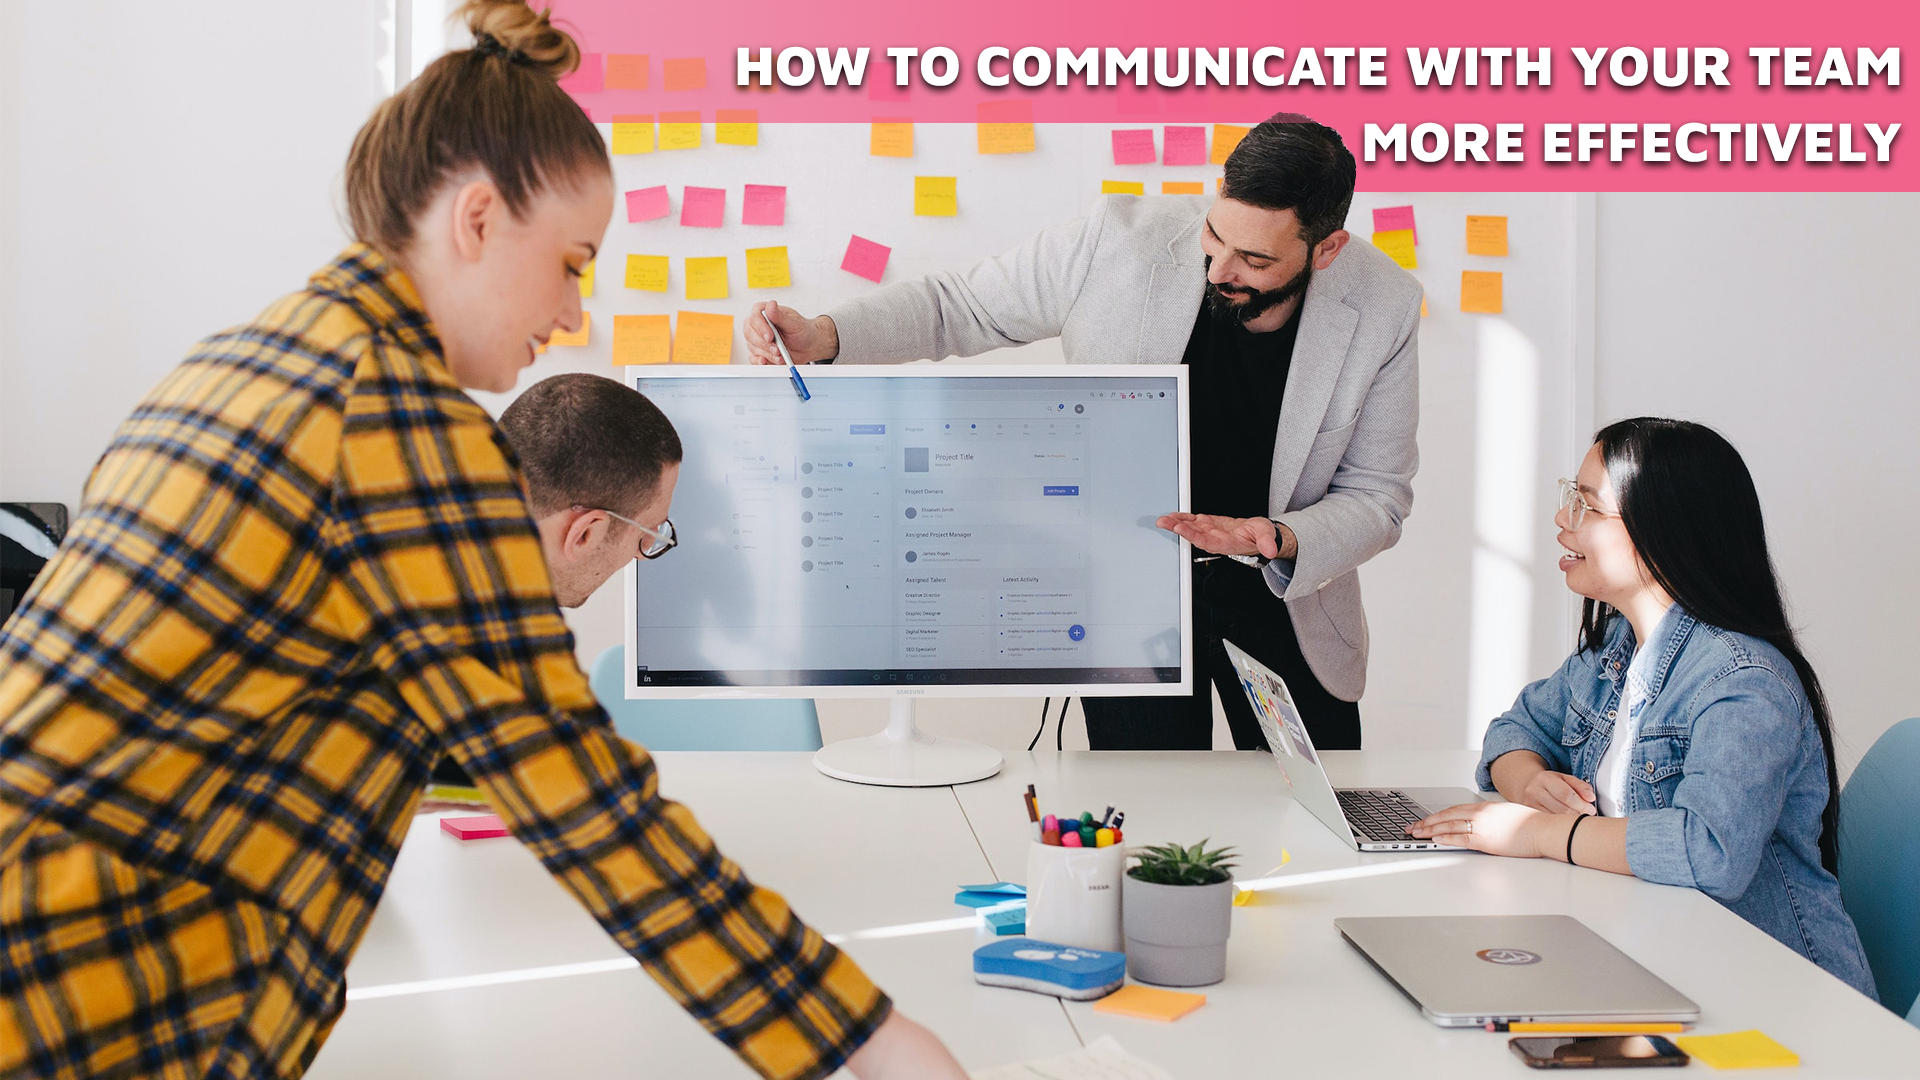 How to Communicate With Your Team More Effectively